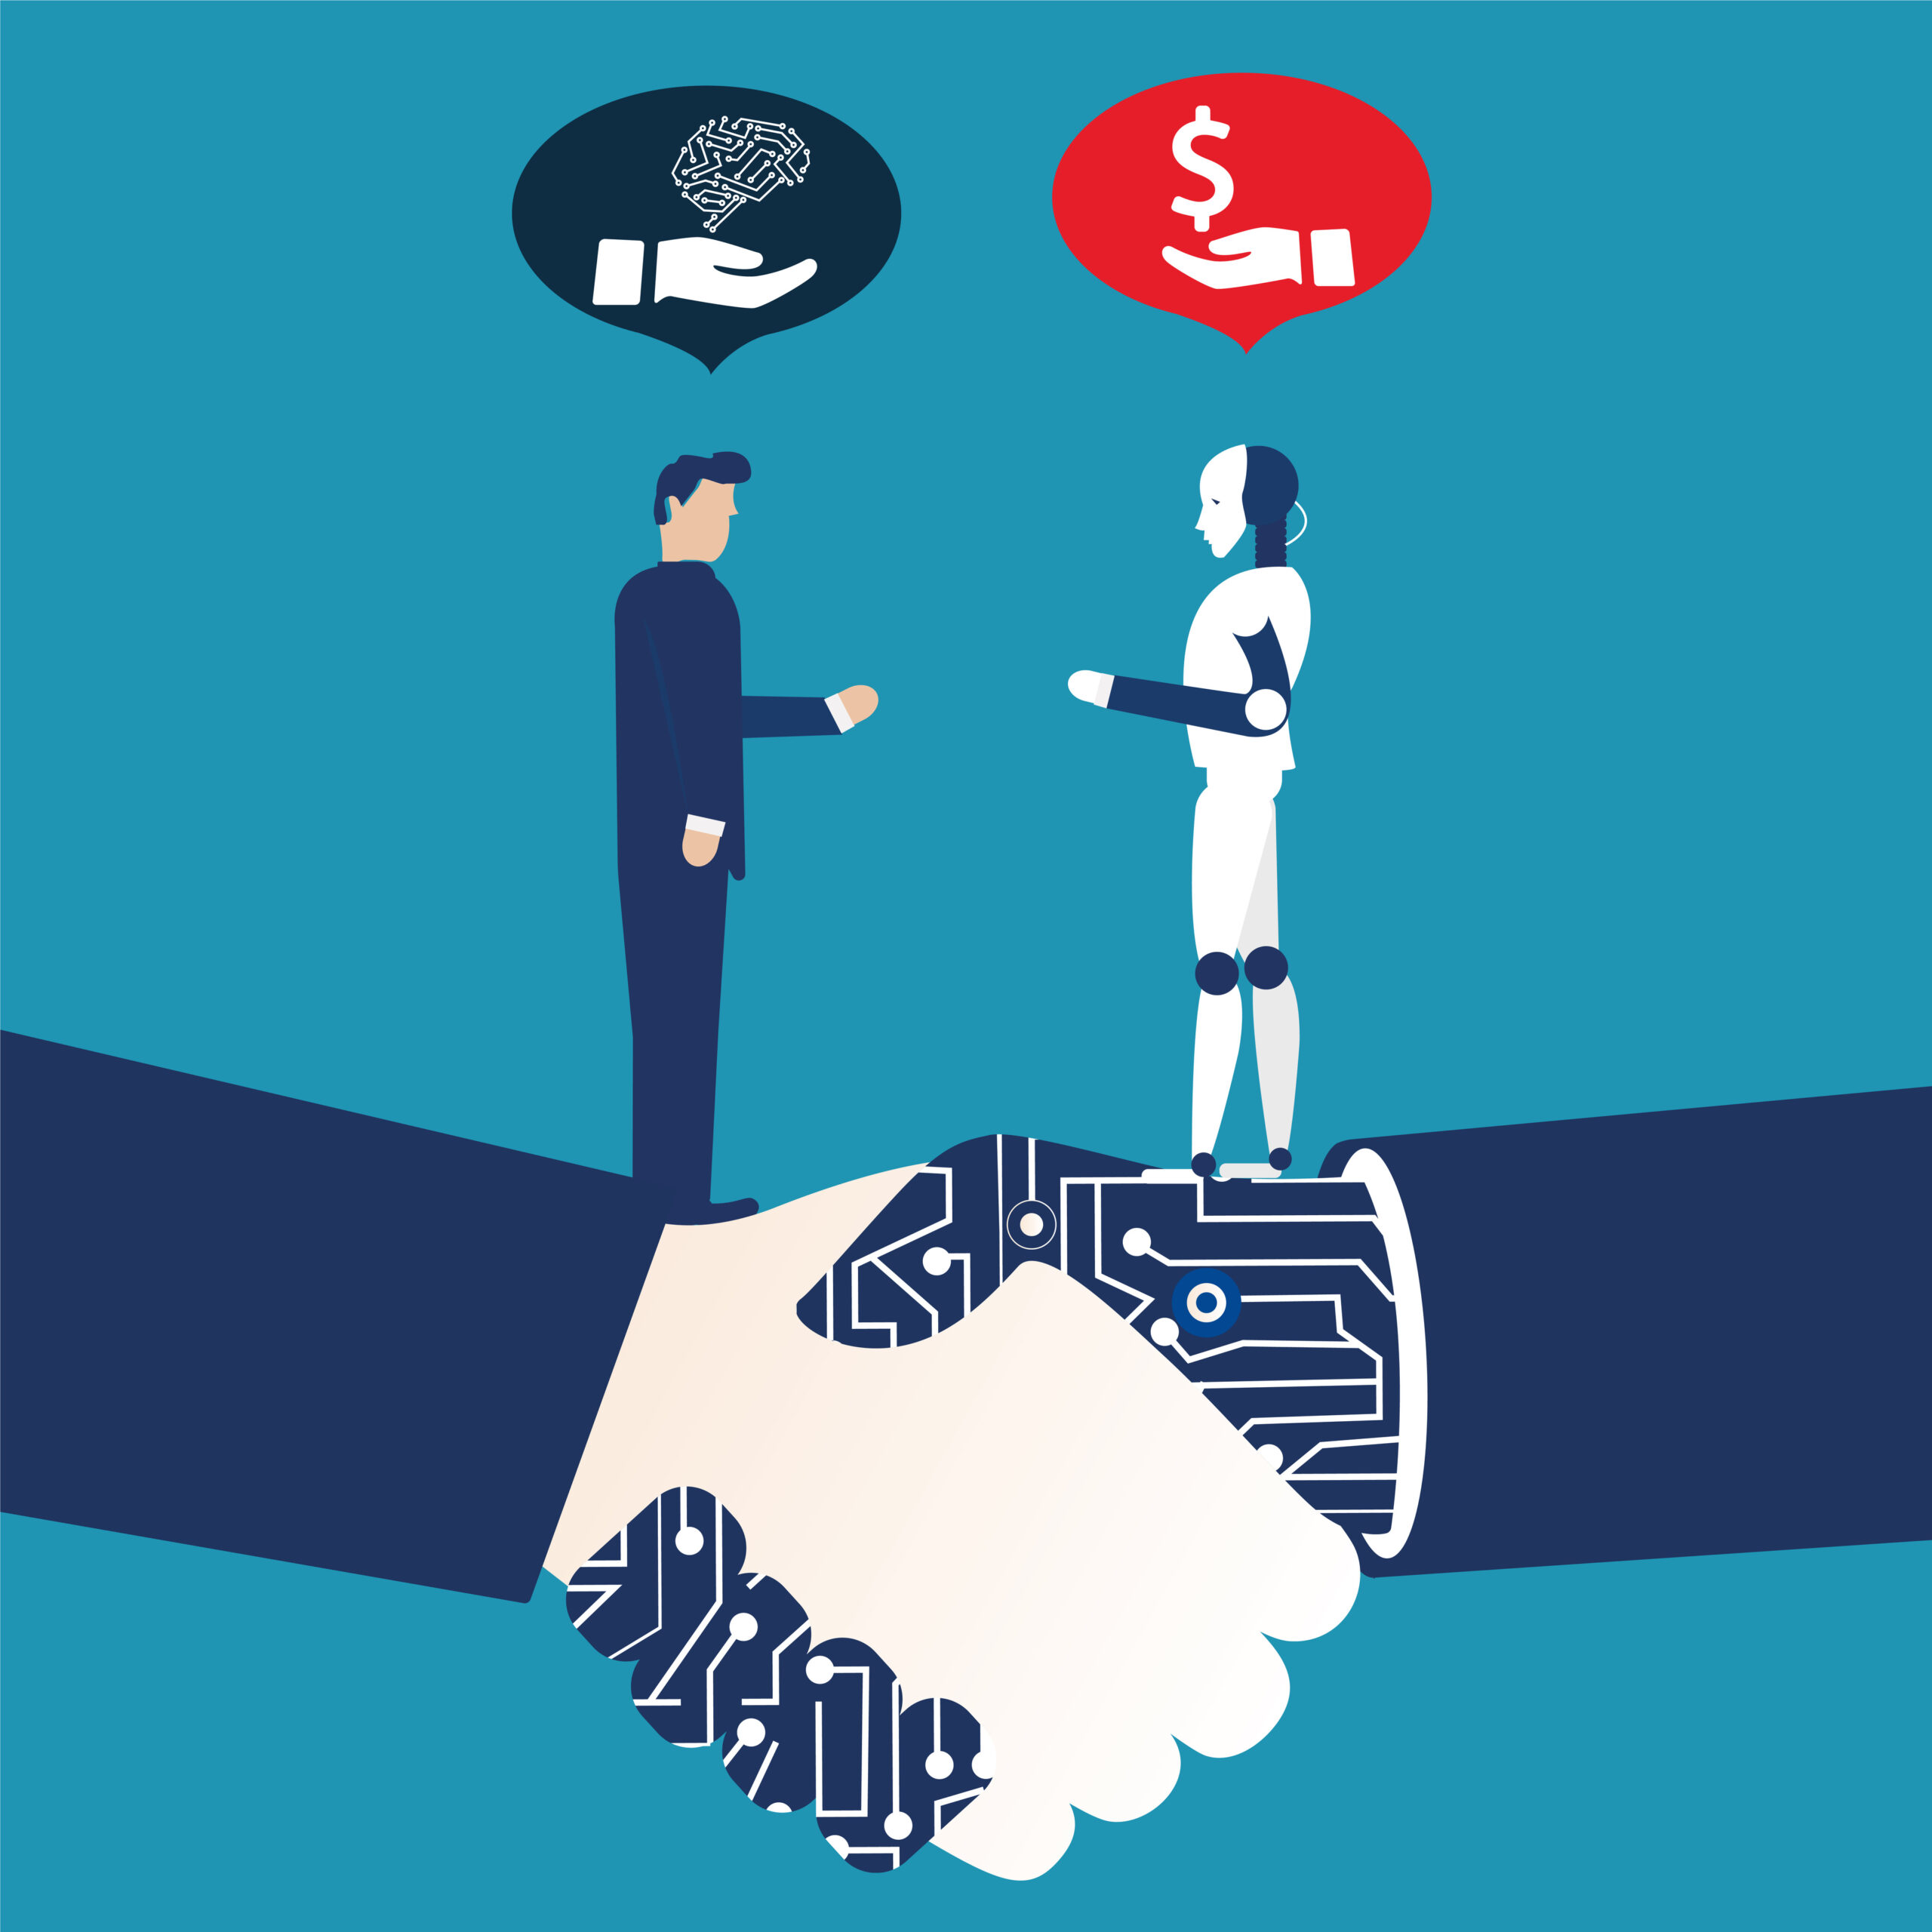 Pricing-AI-and-Human-Collaboration-Symbolized-By-Virtual-Handshake